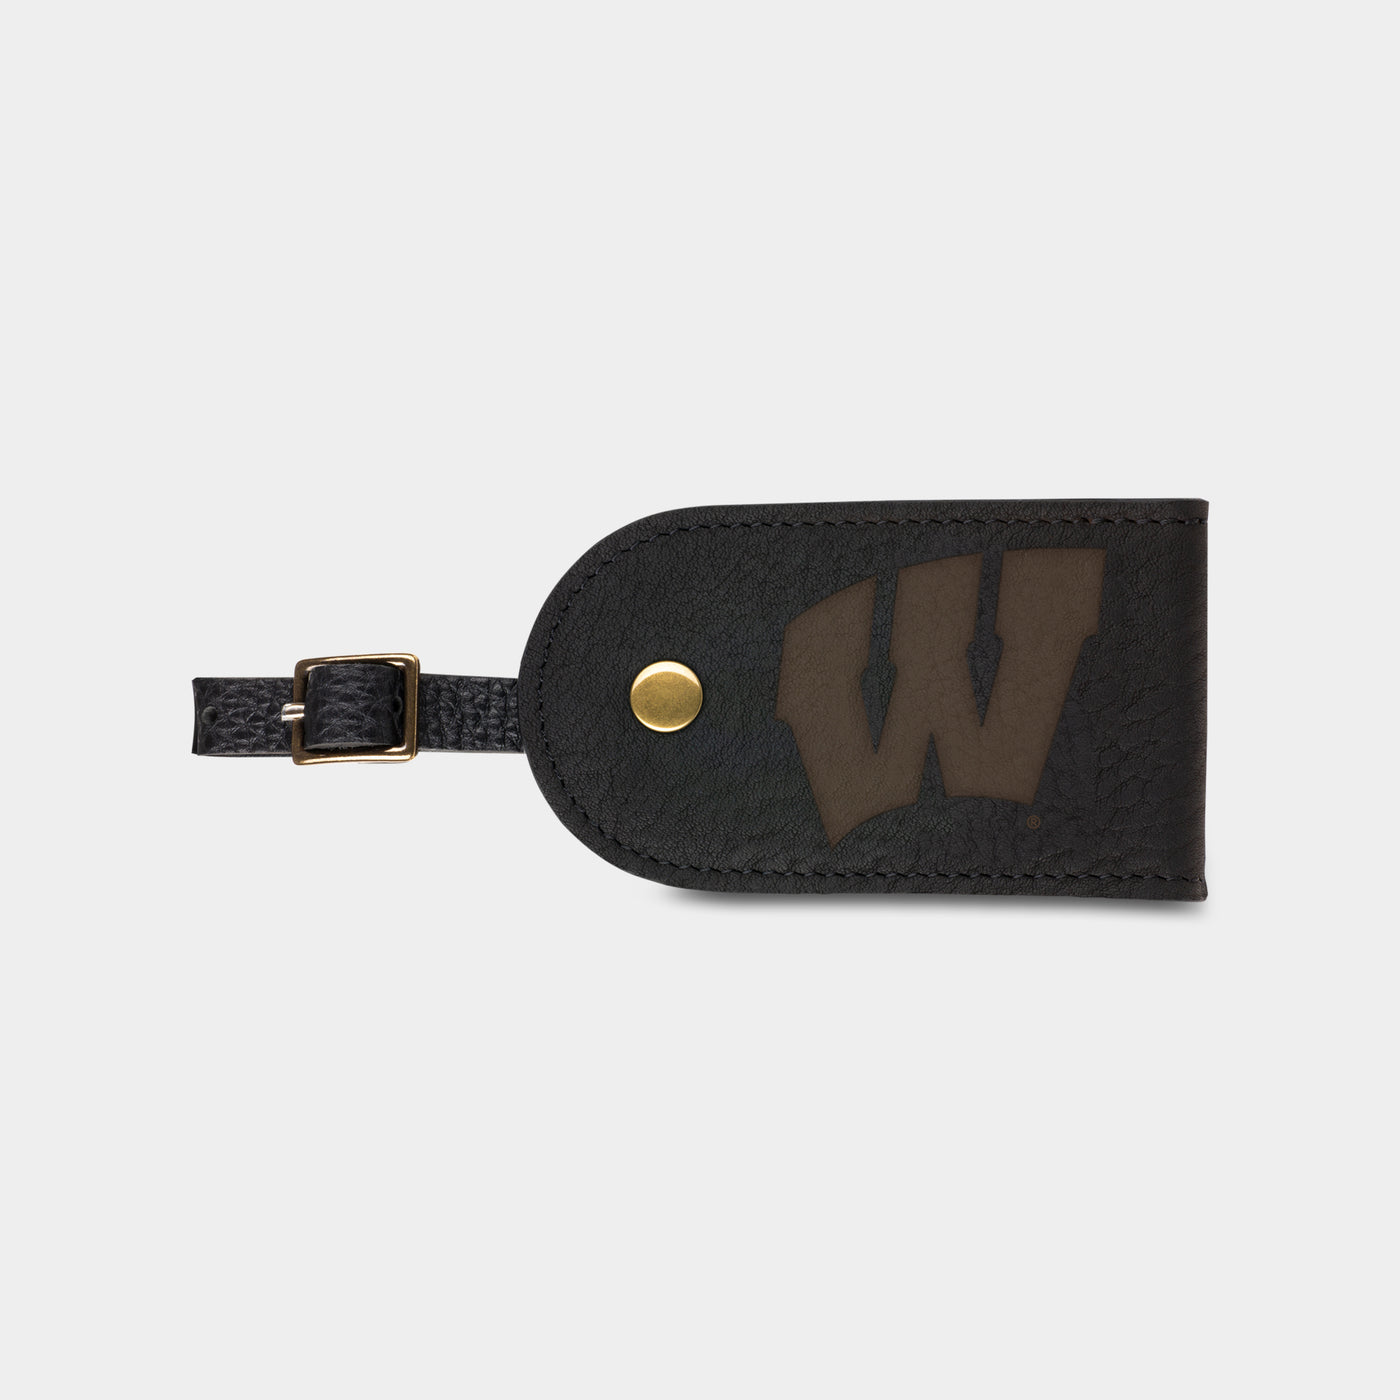 Wisconsin Badgers "W" Luggage Tag